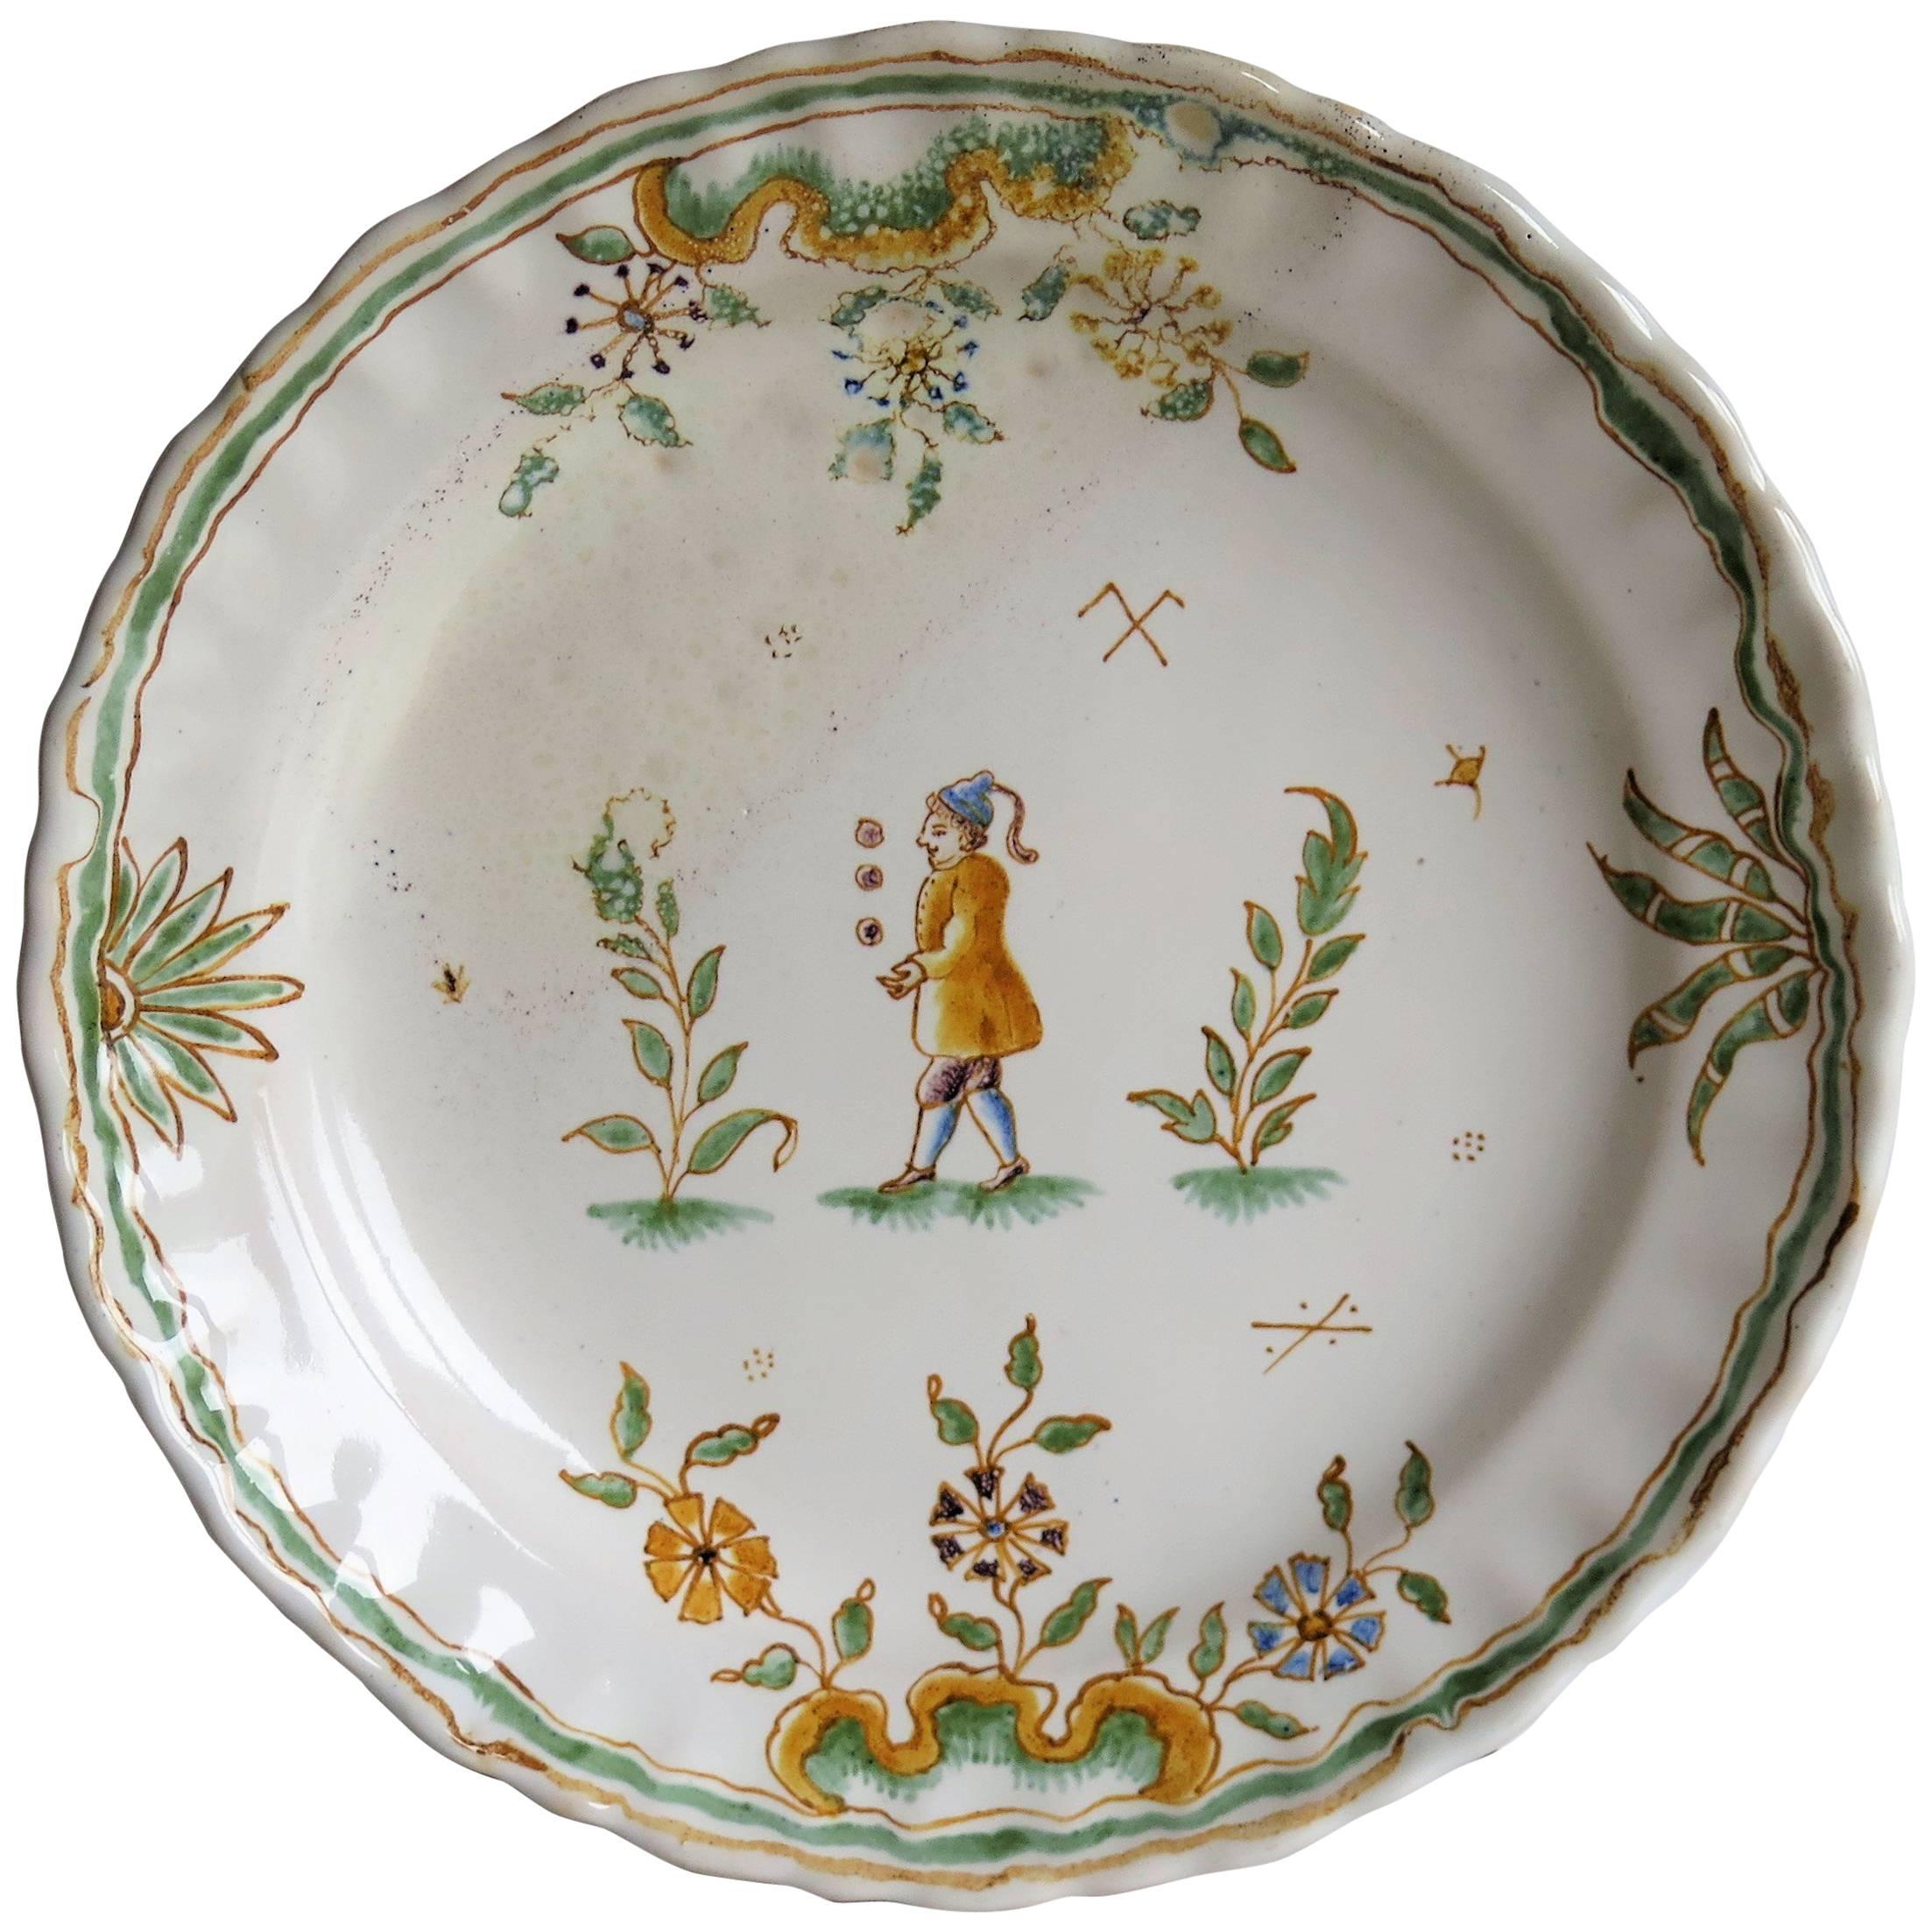 Late 18th Century, Faience Dish or Plate, Hand-Painted Juggler, circa 1790